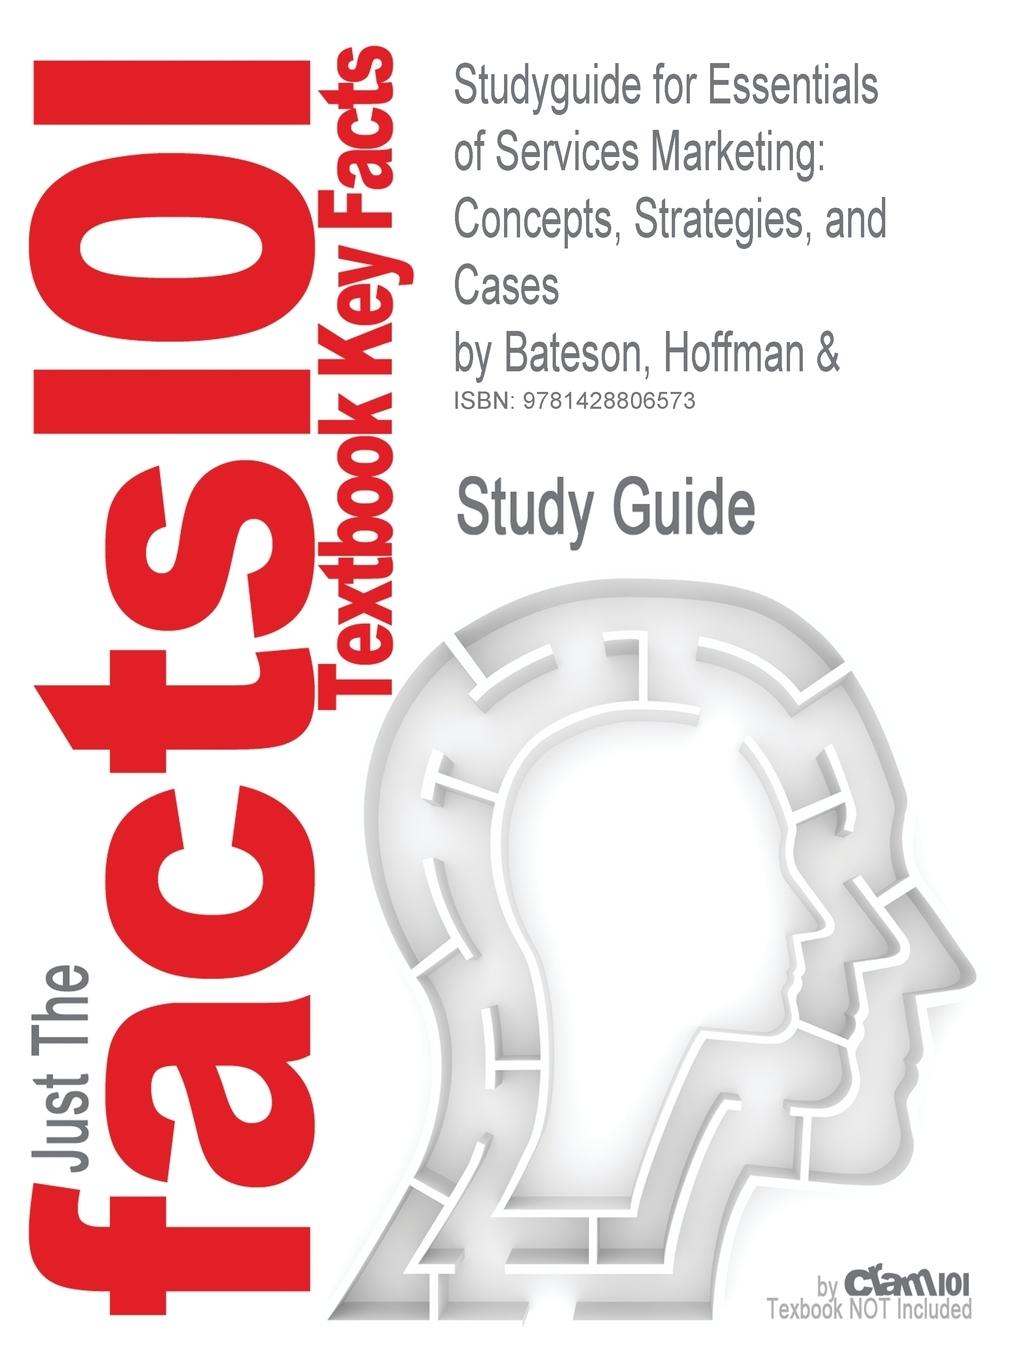 Studyguide for Essentials of Services Marketing - Hoffman and Bateson, And Bateson Cram101 Textbook Reviews